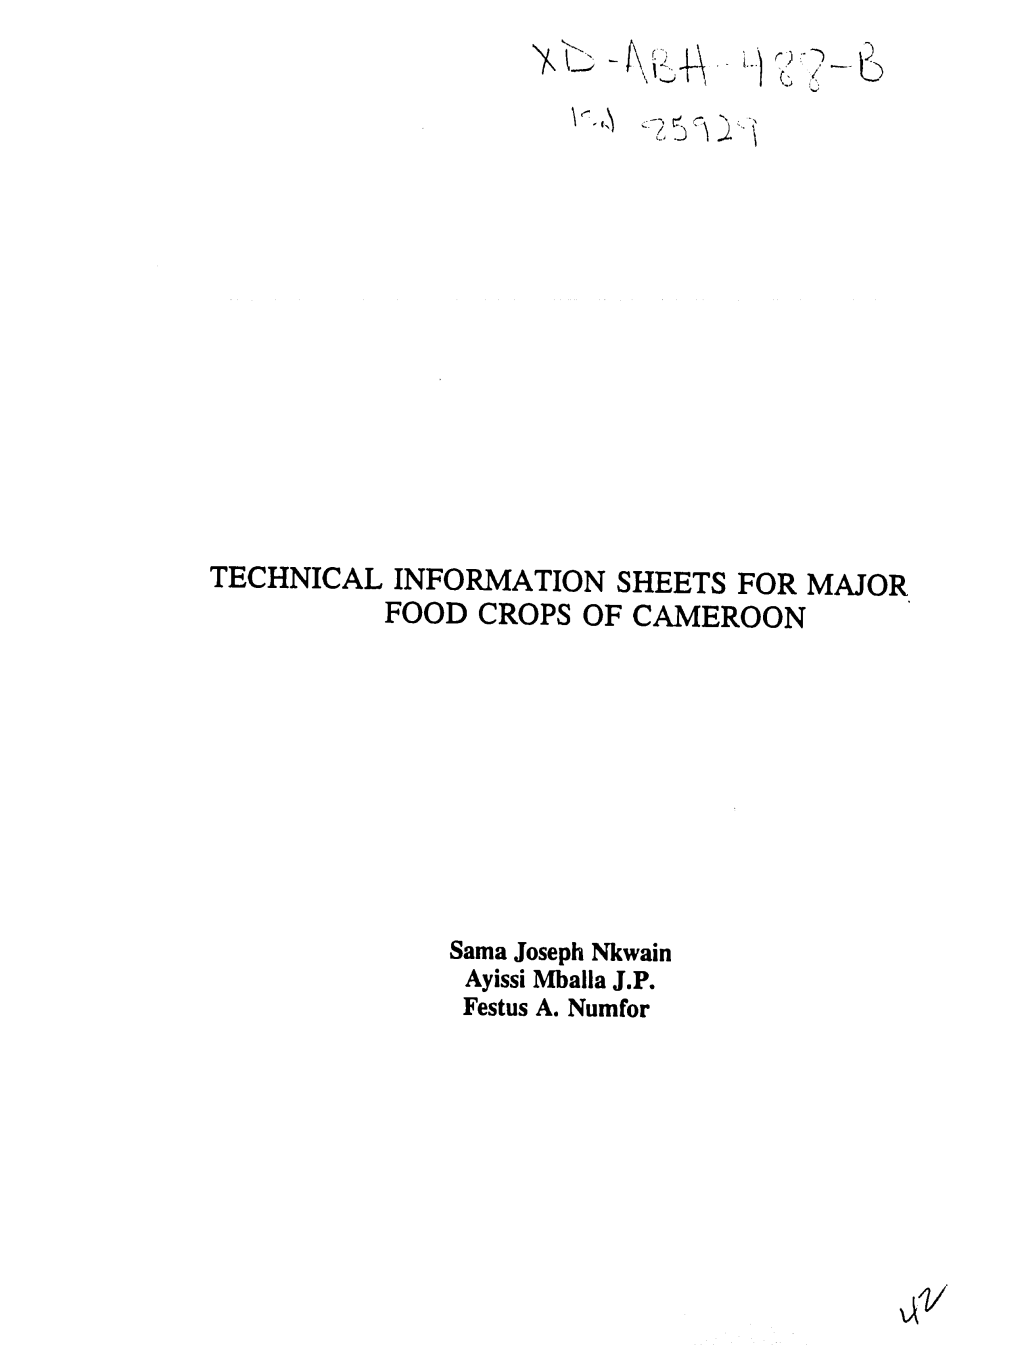 Technical Information Sheets for Major Food Crops of Cameroon